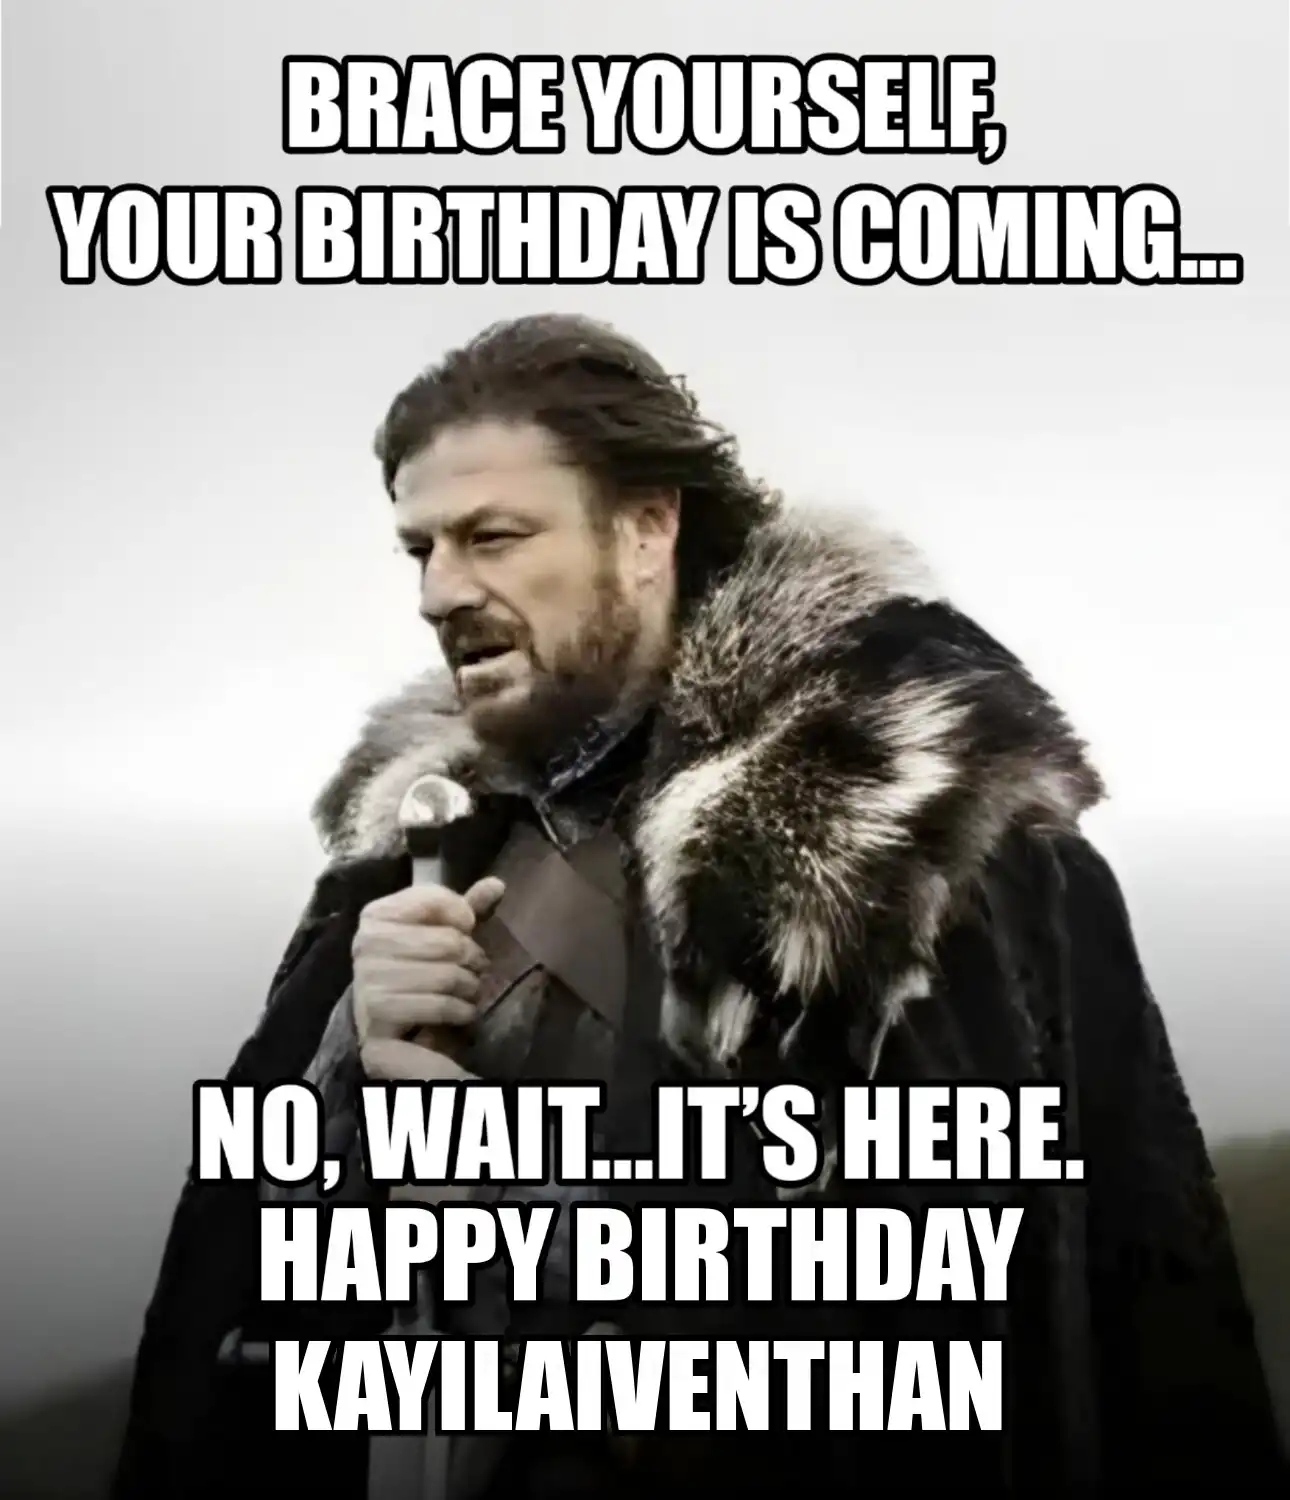 Happy Birthday Kayilaiventhan Brace Yourself Your Birthday Is Coming Meme